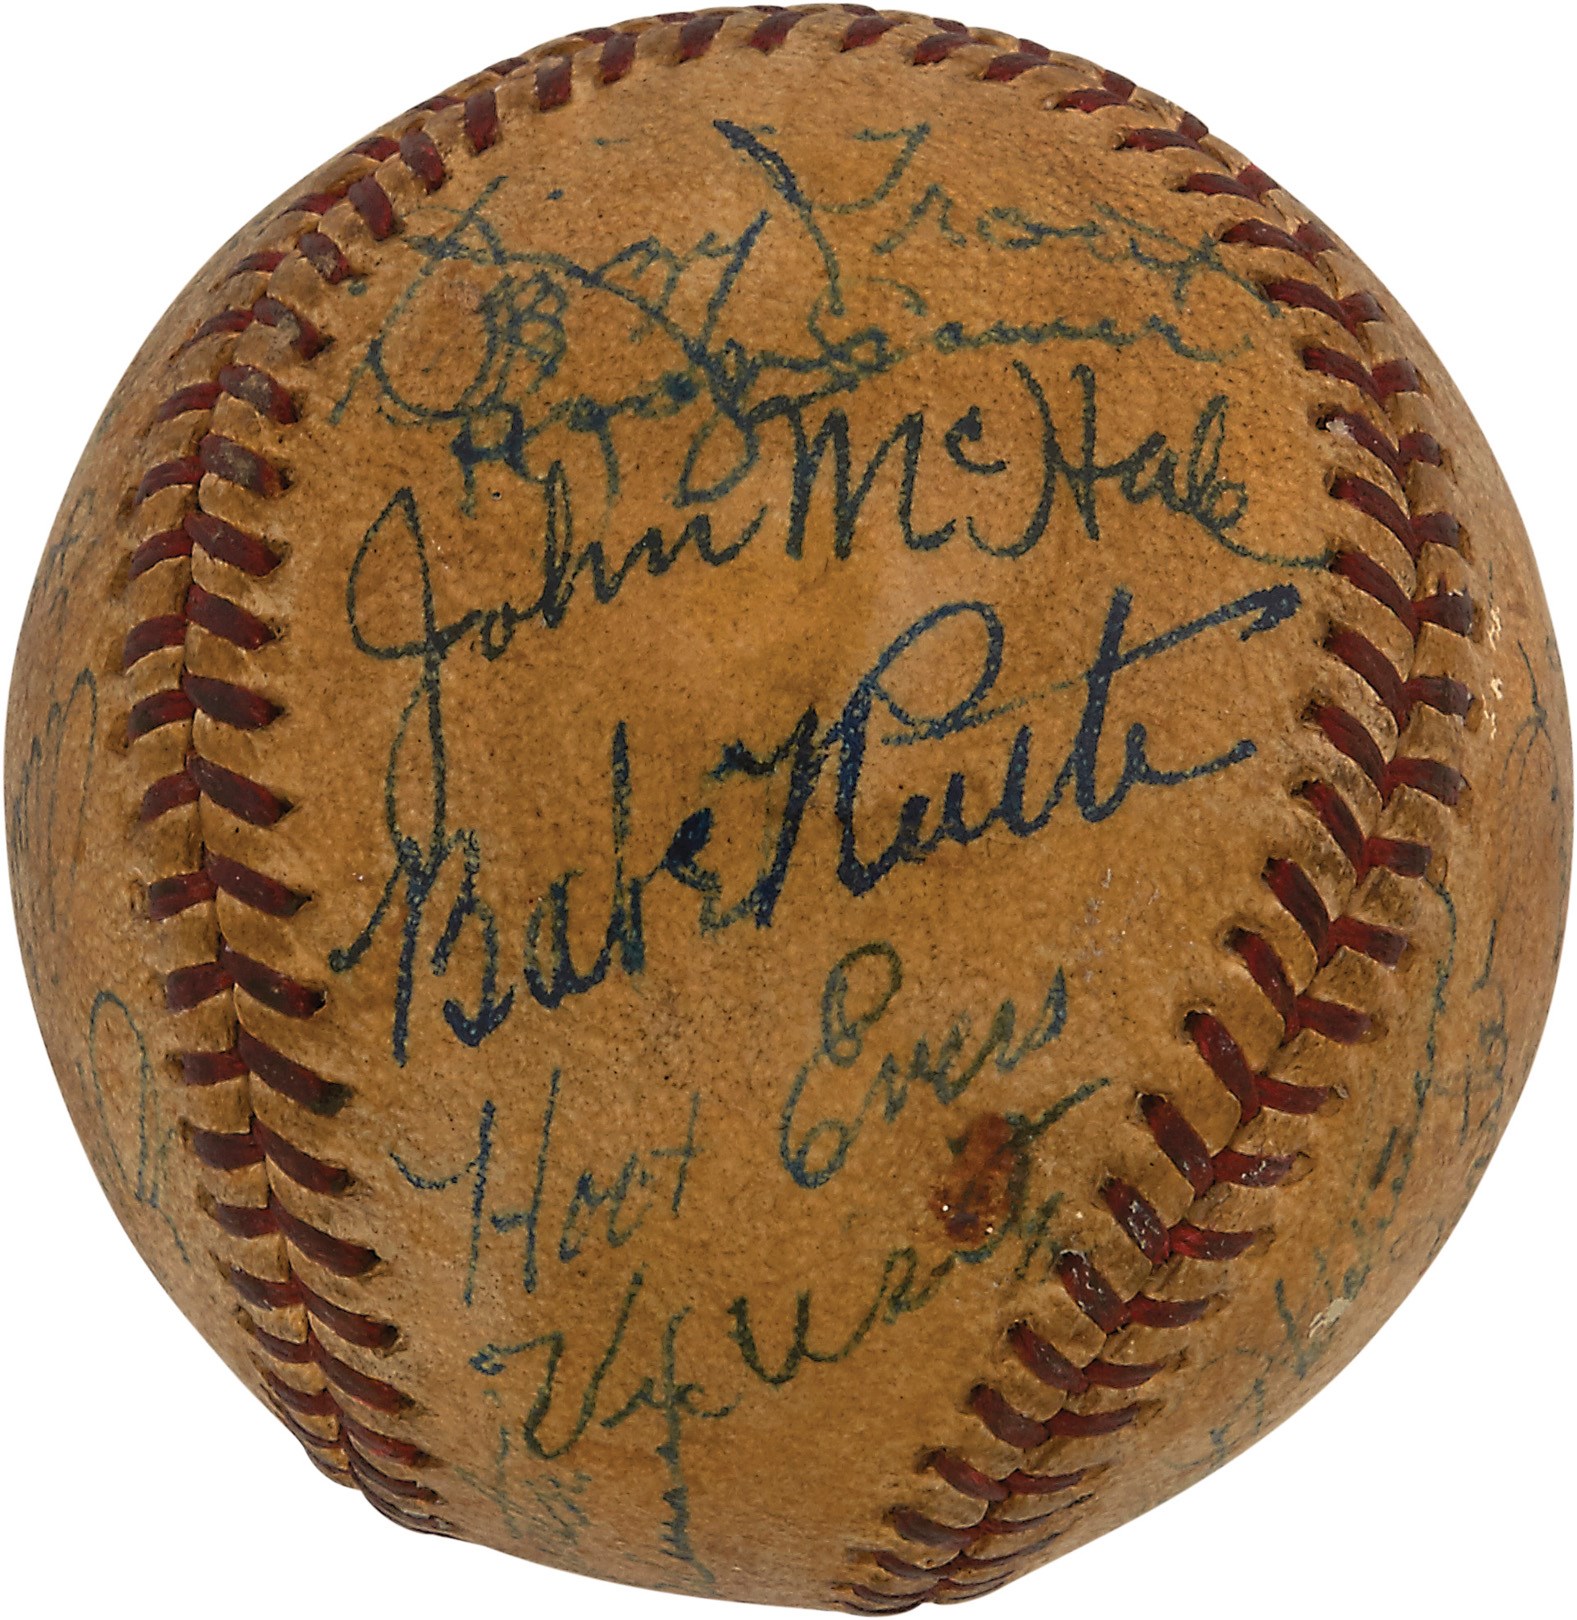 Ruth and Gehrig - 1946 Detroit Tigers Team-Signed Baseball w/Babe Ruth (PSA)